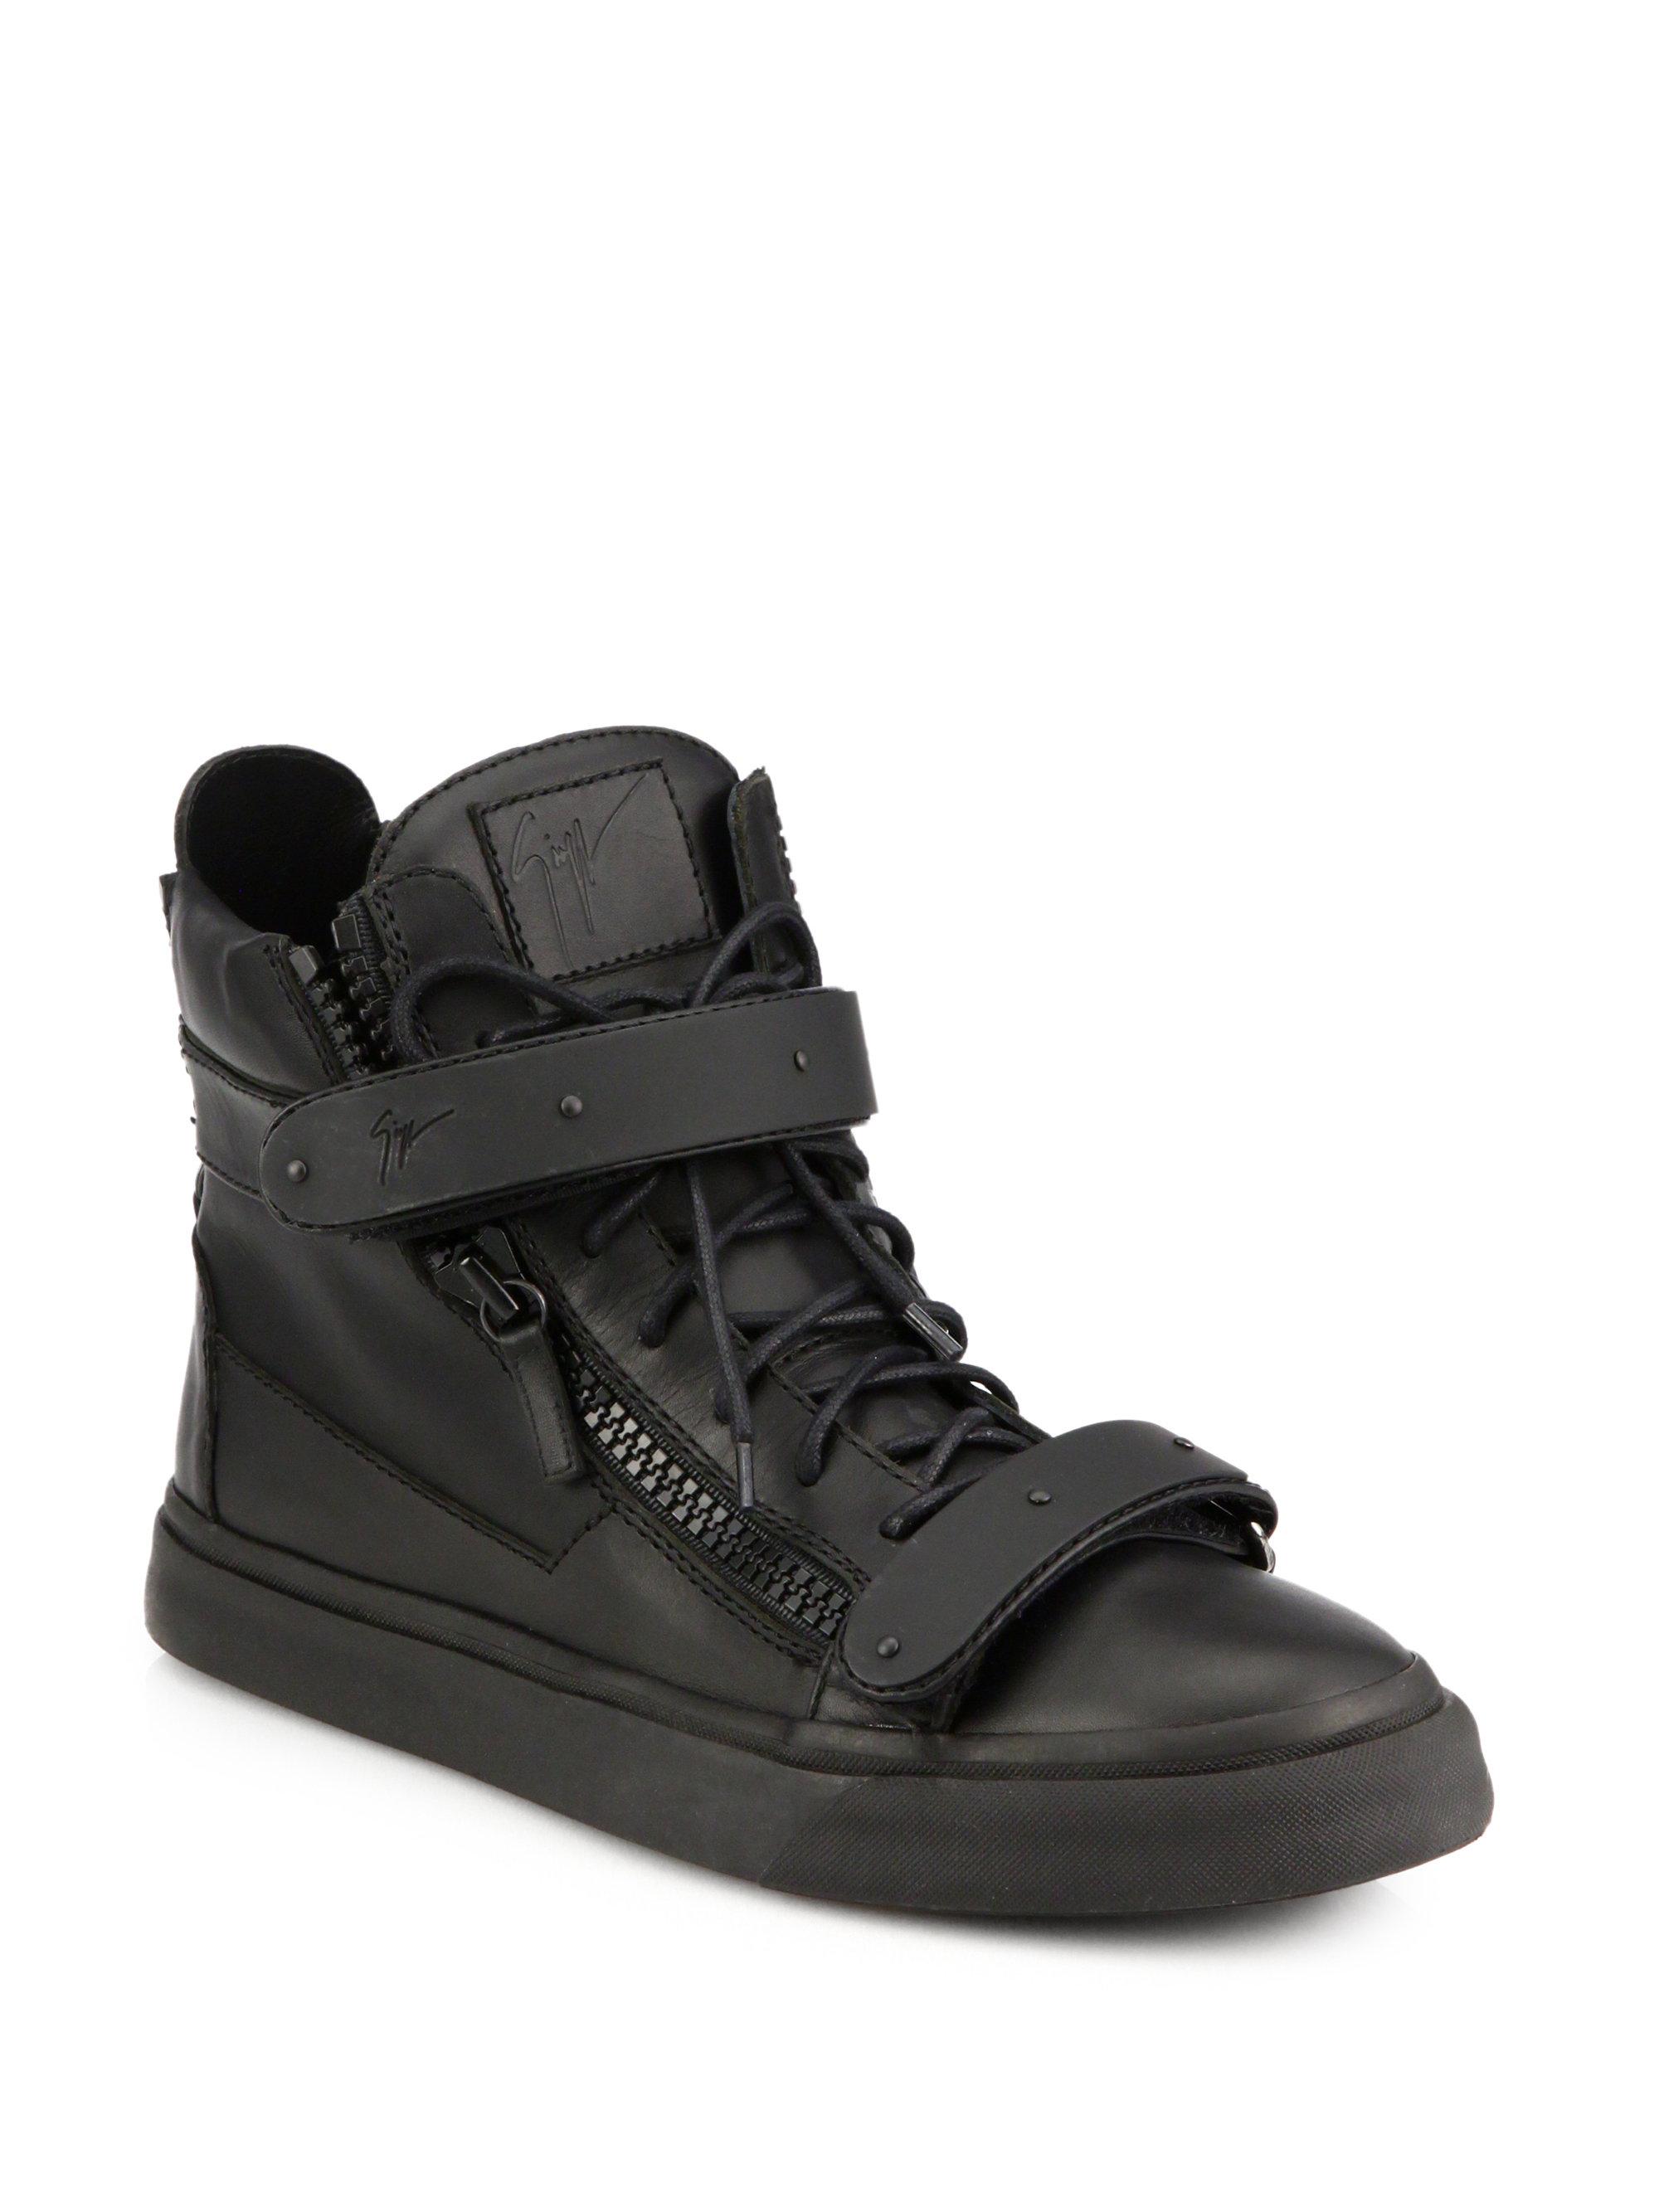 Giuseppe Zanotti Leather Double-bar High-top Sneakers in Black for Men - Lyst